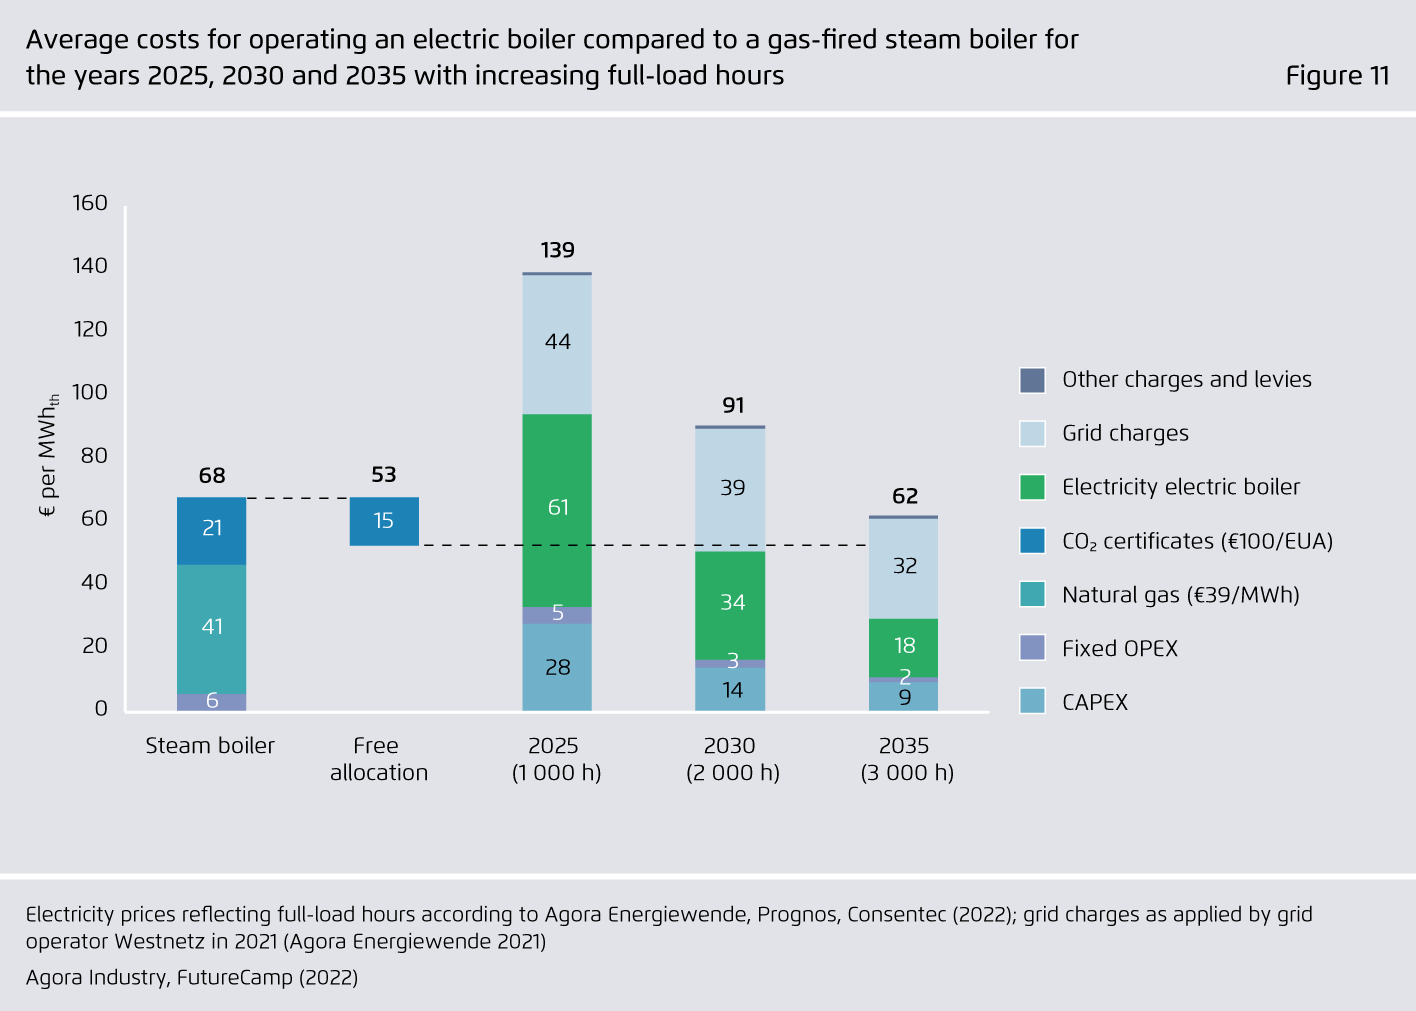 Preview for Average costs for operating an electric boiler compared to a gas-fired steam boiler for the years 2025, 2030 and 2035 with increasing full-load hours